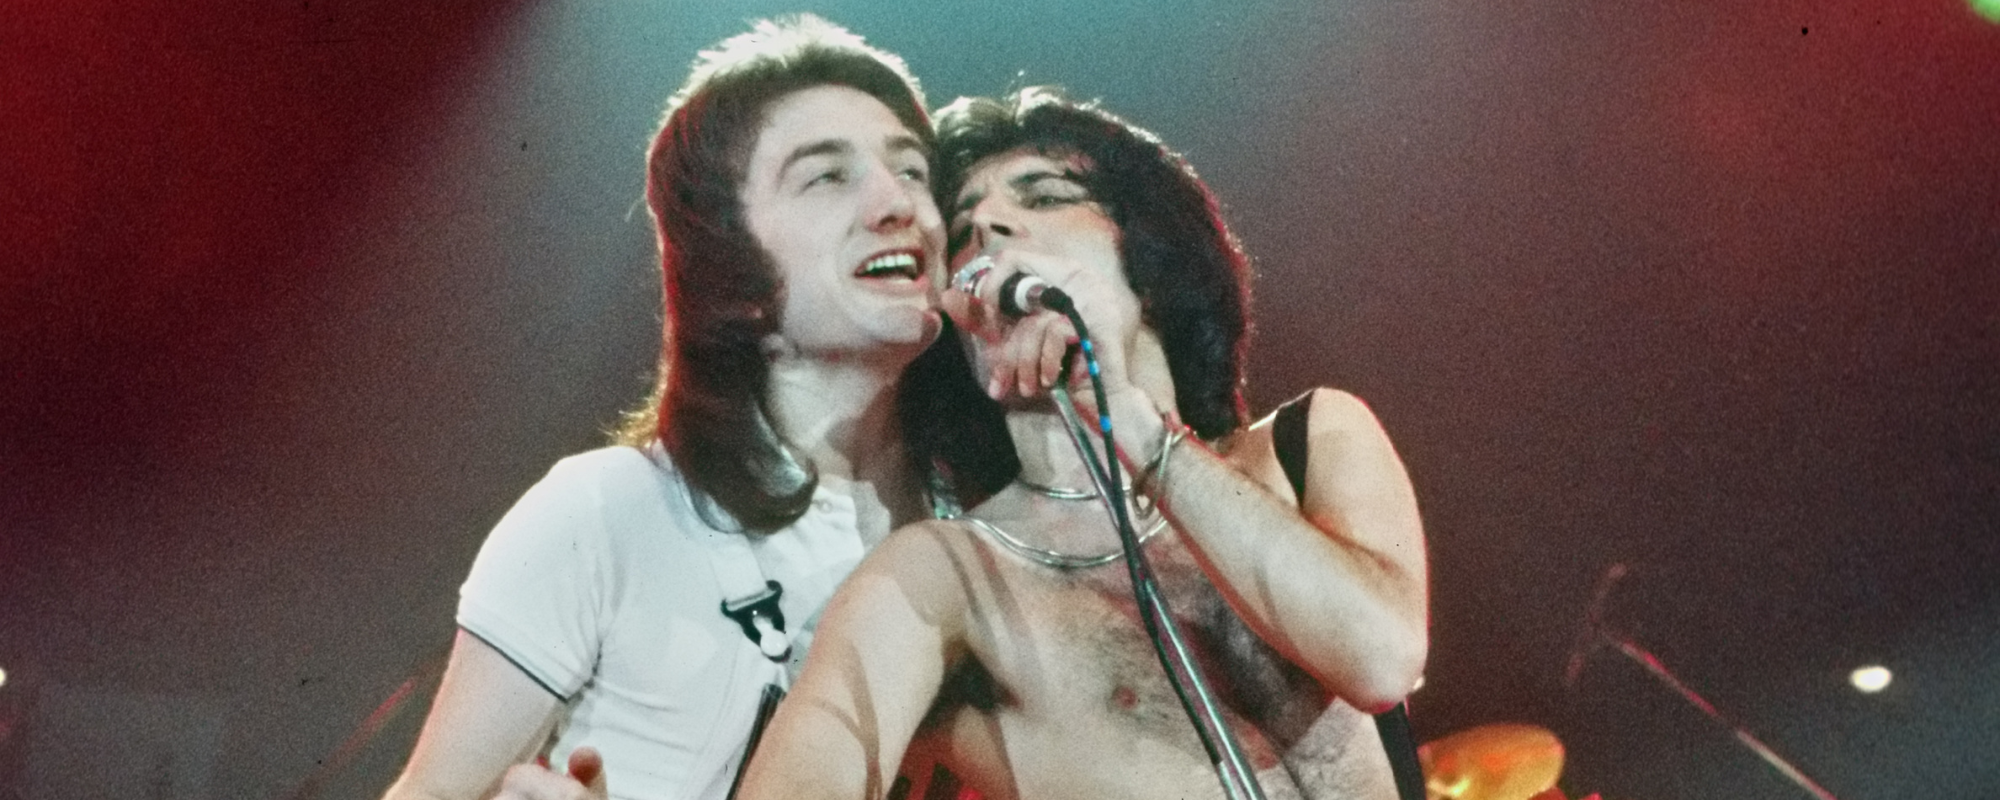 The Meaning Behind Queen’s “Another One Bites the Dust,” a Song That Was Nearly About Cowboys